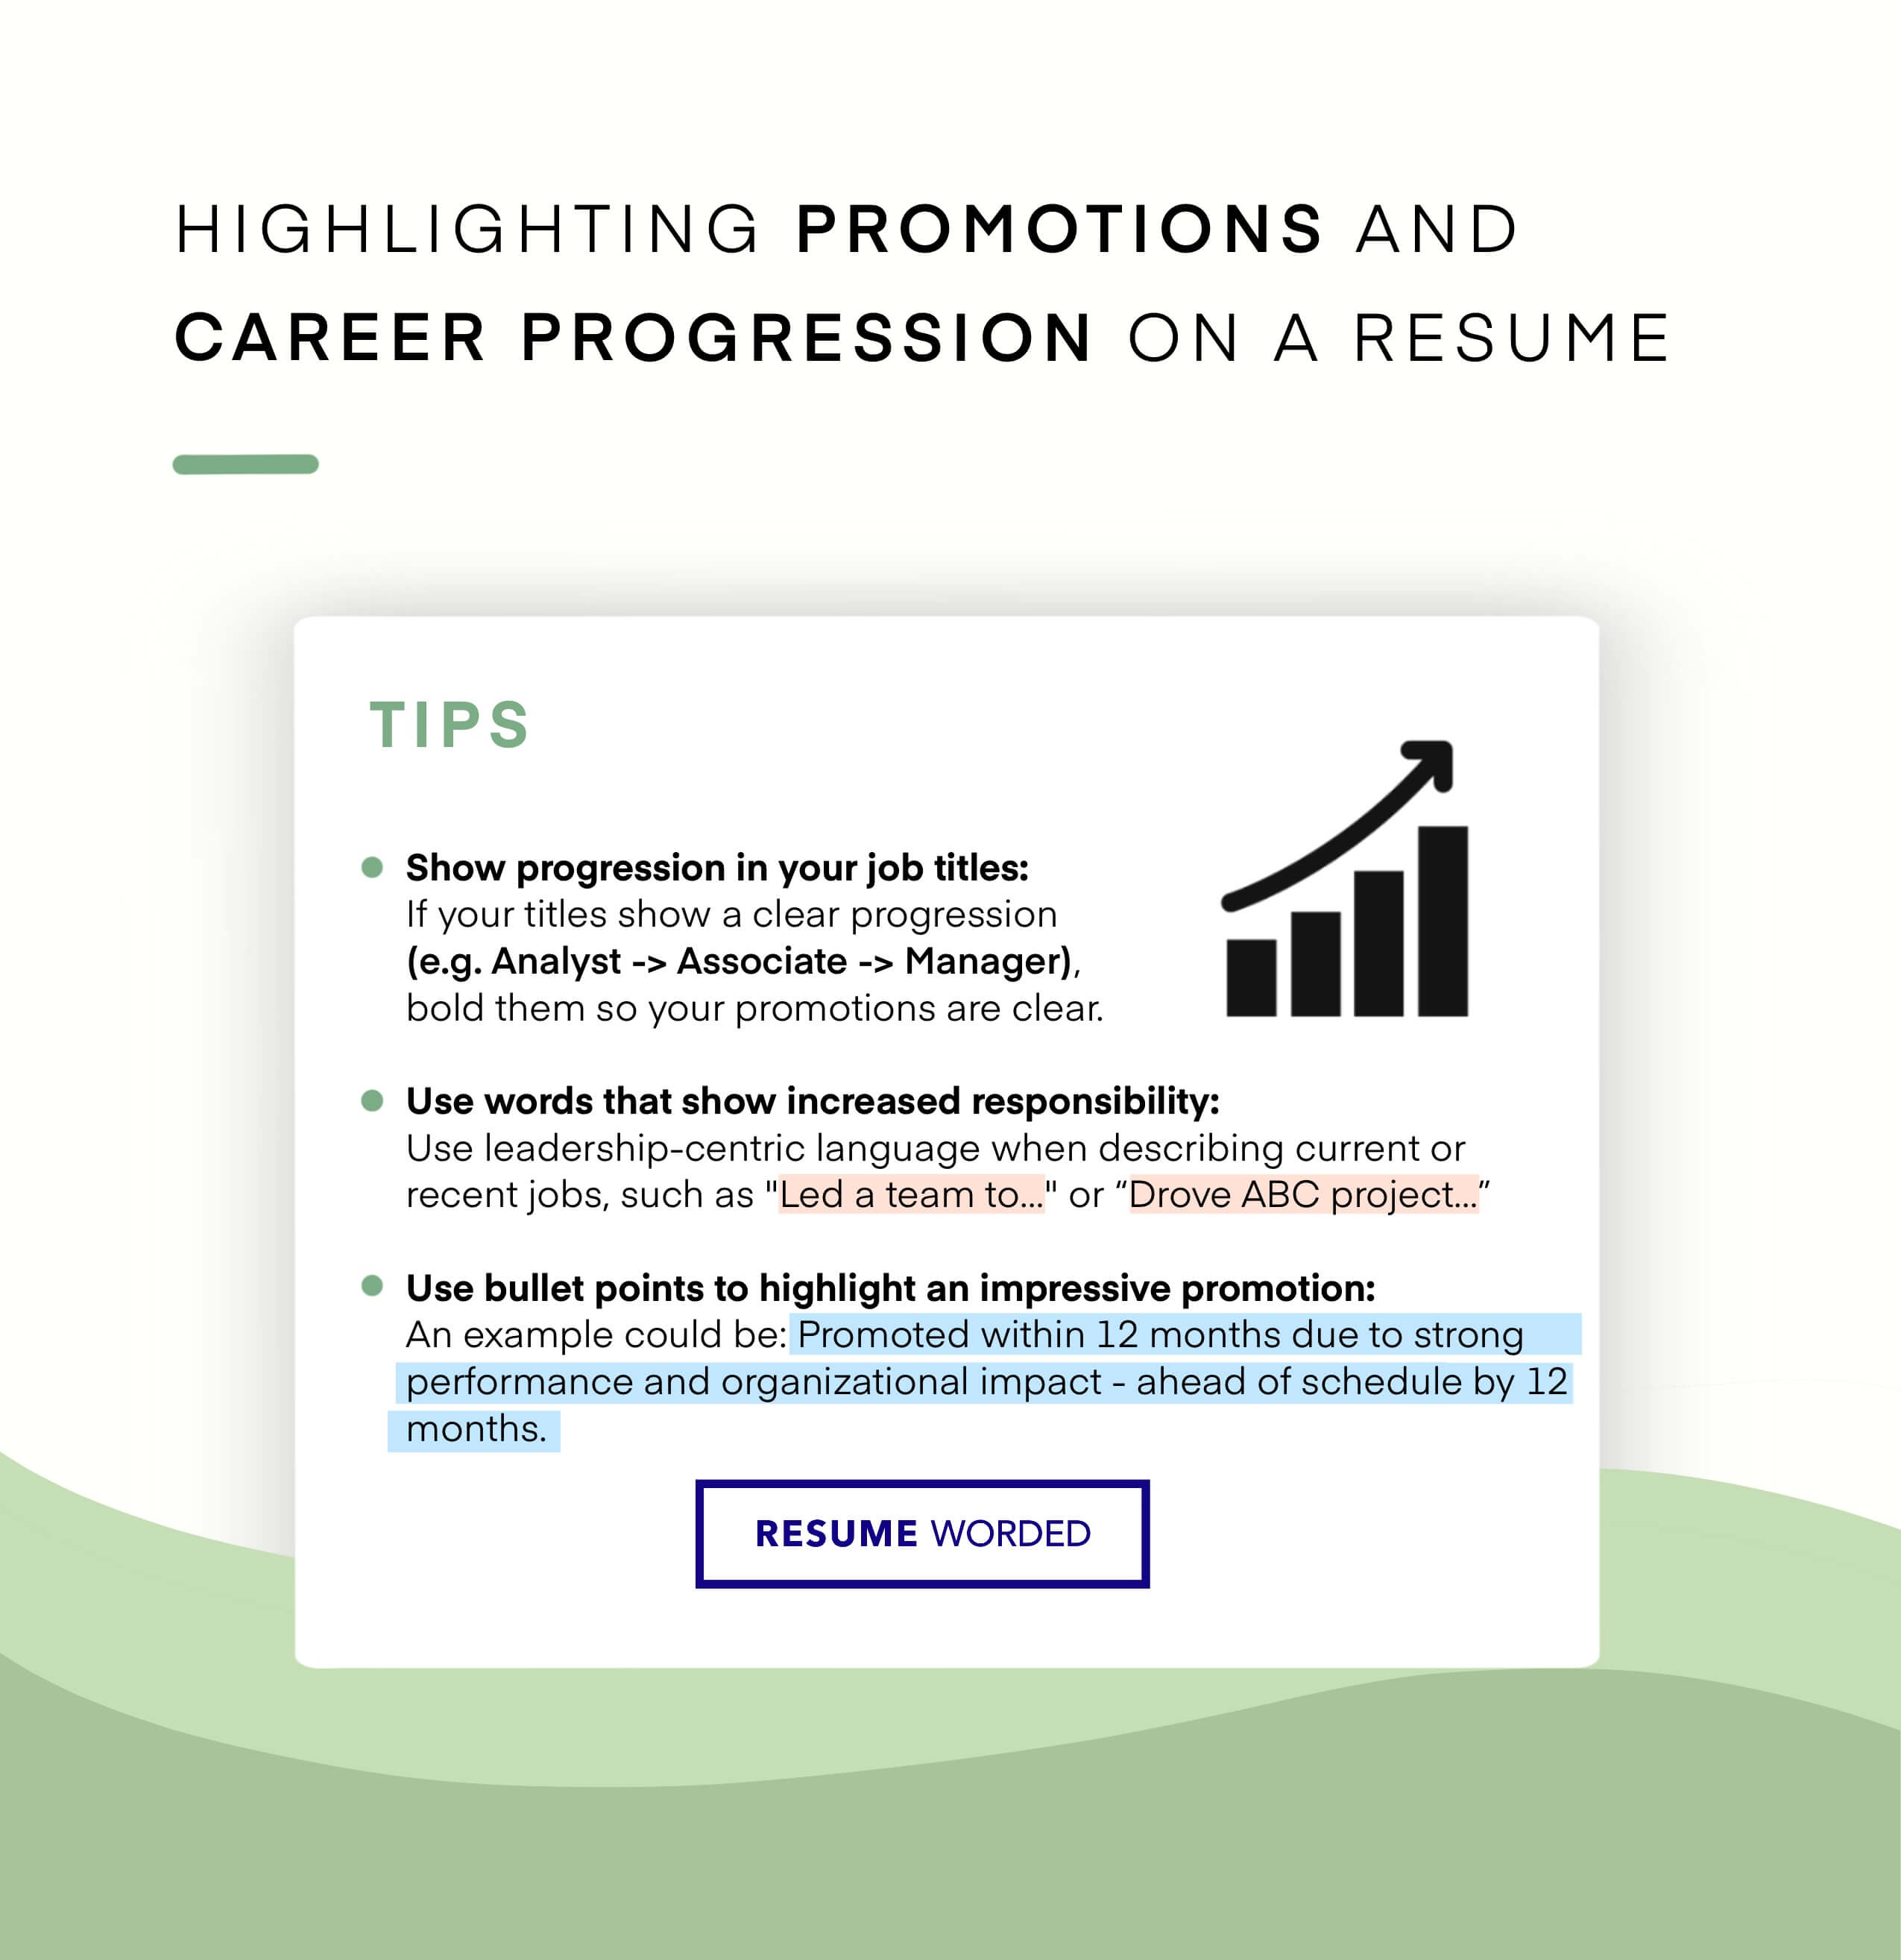 Emphasizes professional growth through promotions in marketing roles - Marketing Director Resume